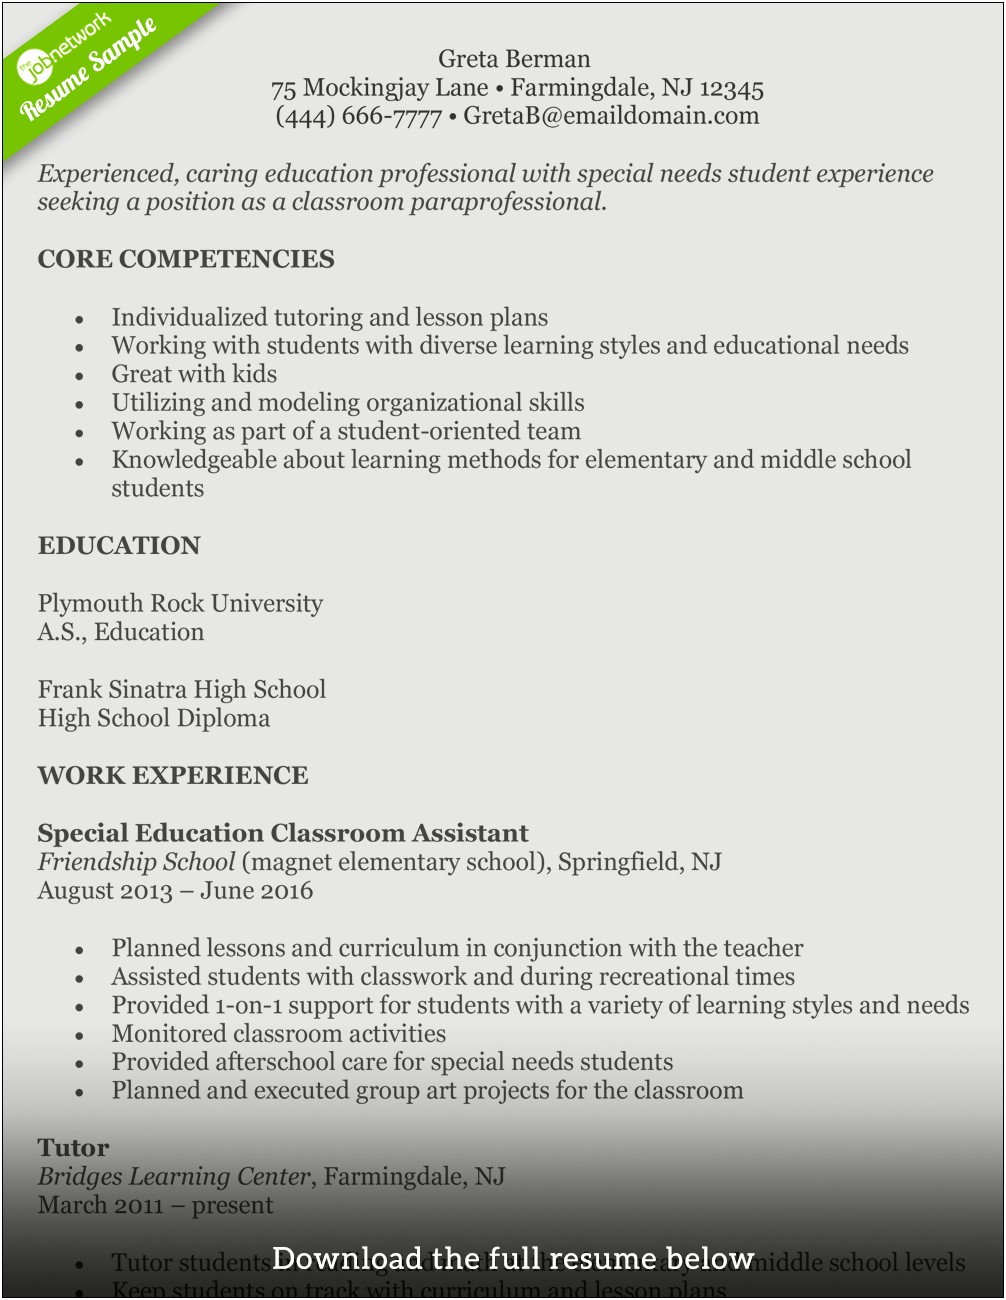 Objective Of A Resume In Teaching